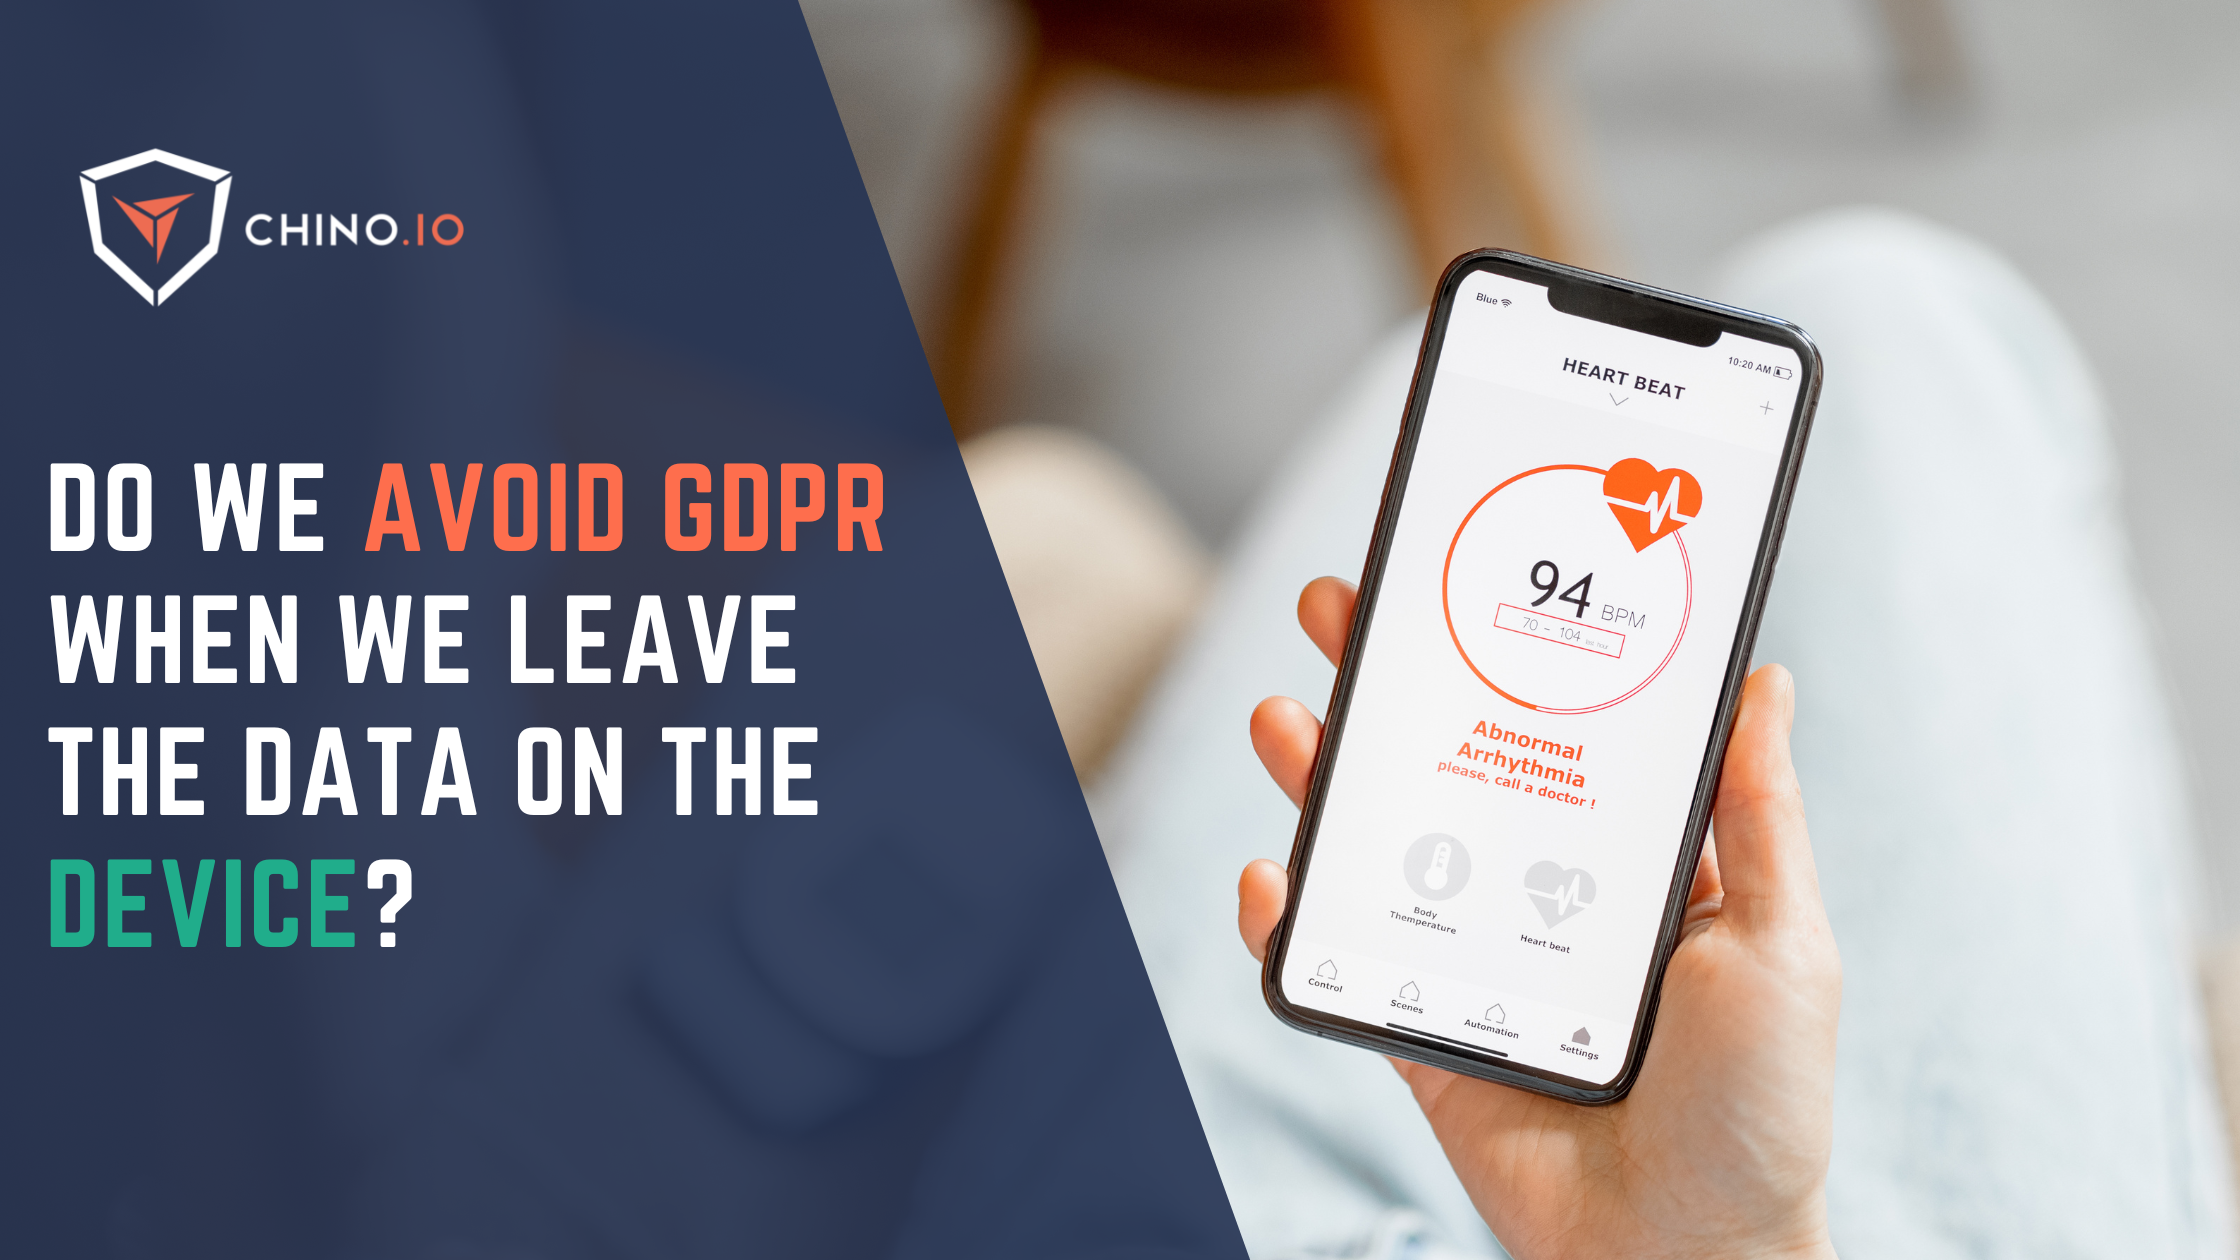 Blog banner that says "Do we avoid GDPR when we leave the data on the device?". On the right a smartphone with an ECG app